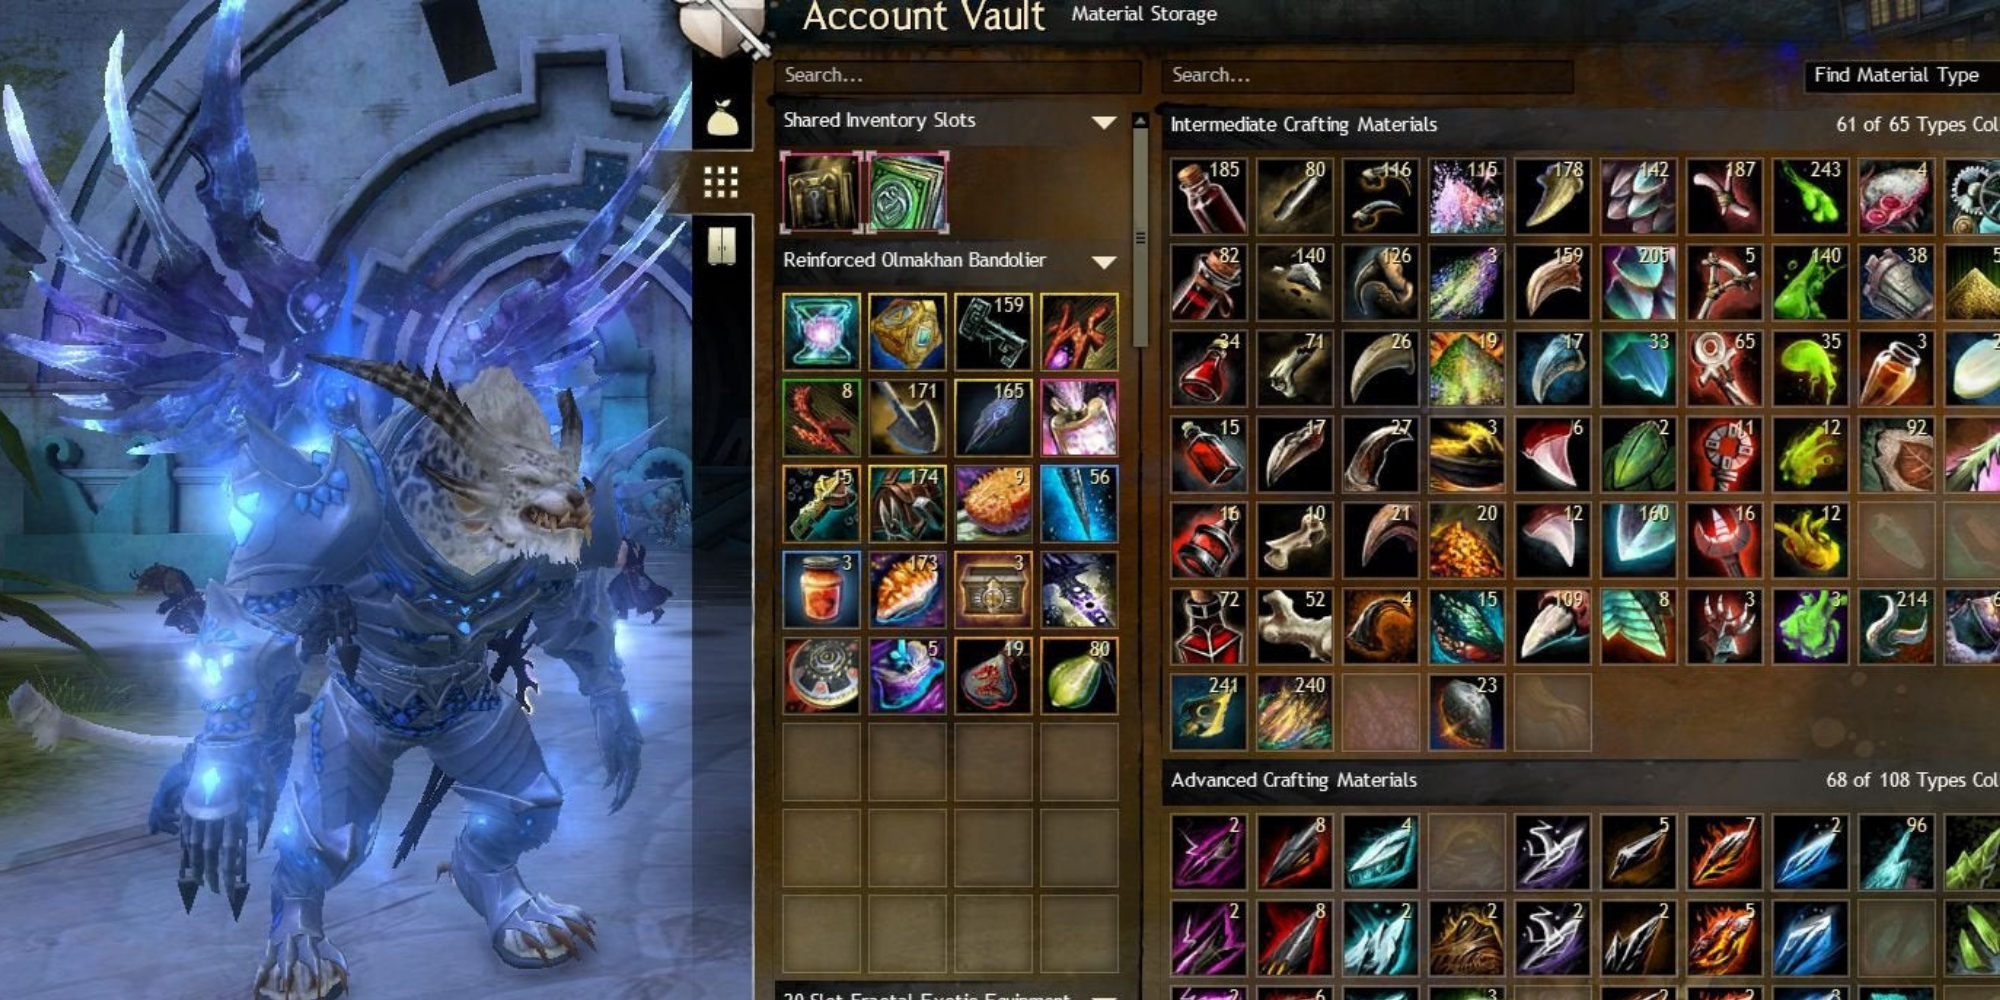 GW2 - screenshot of material storage and inventory